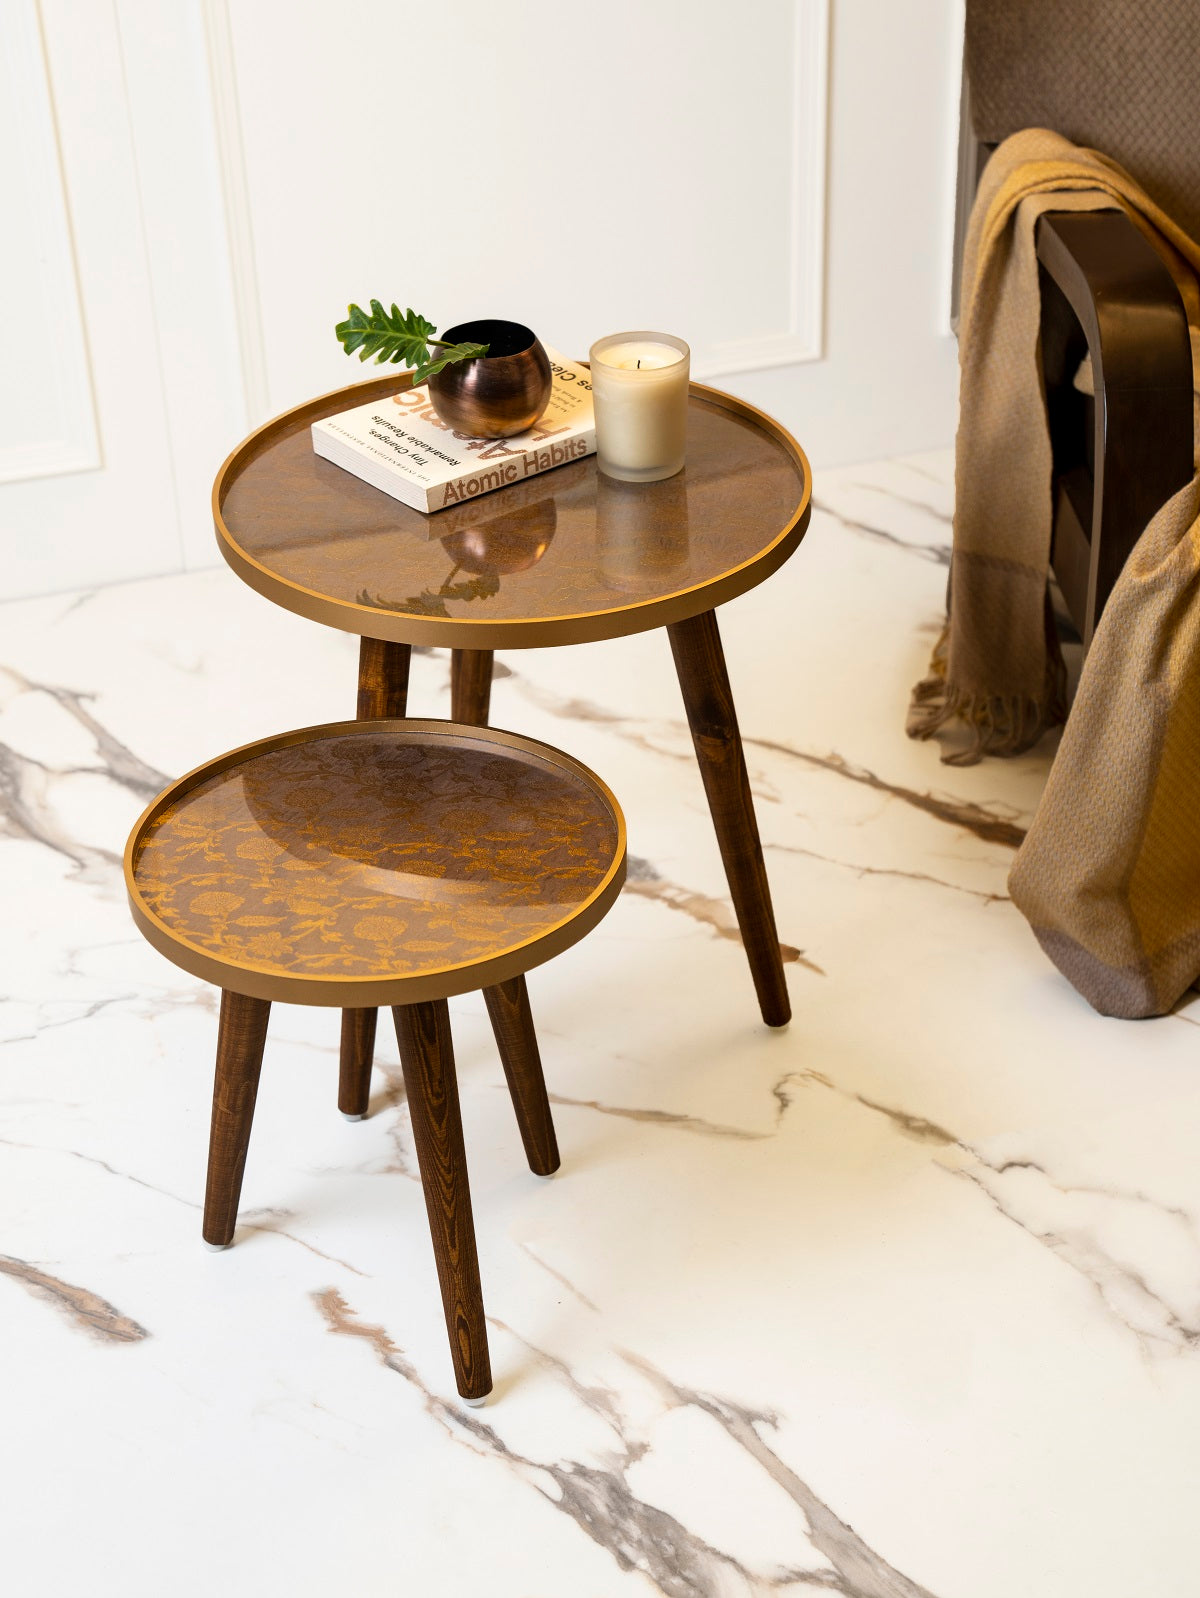 Bela Round Nesting Tables with Wooden Legs, Side Tables, Wooden Tables, Living Room Decor by A Tiny Mistake